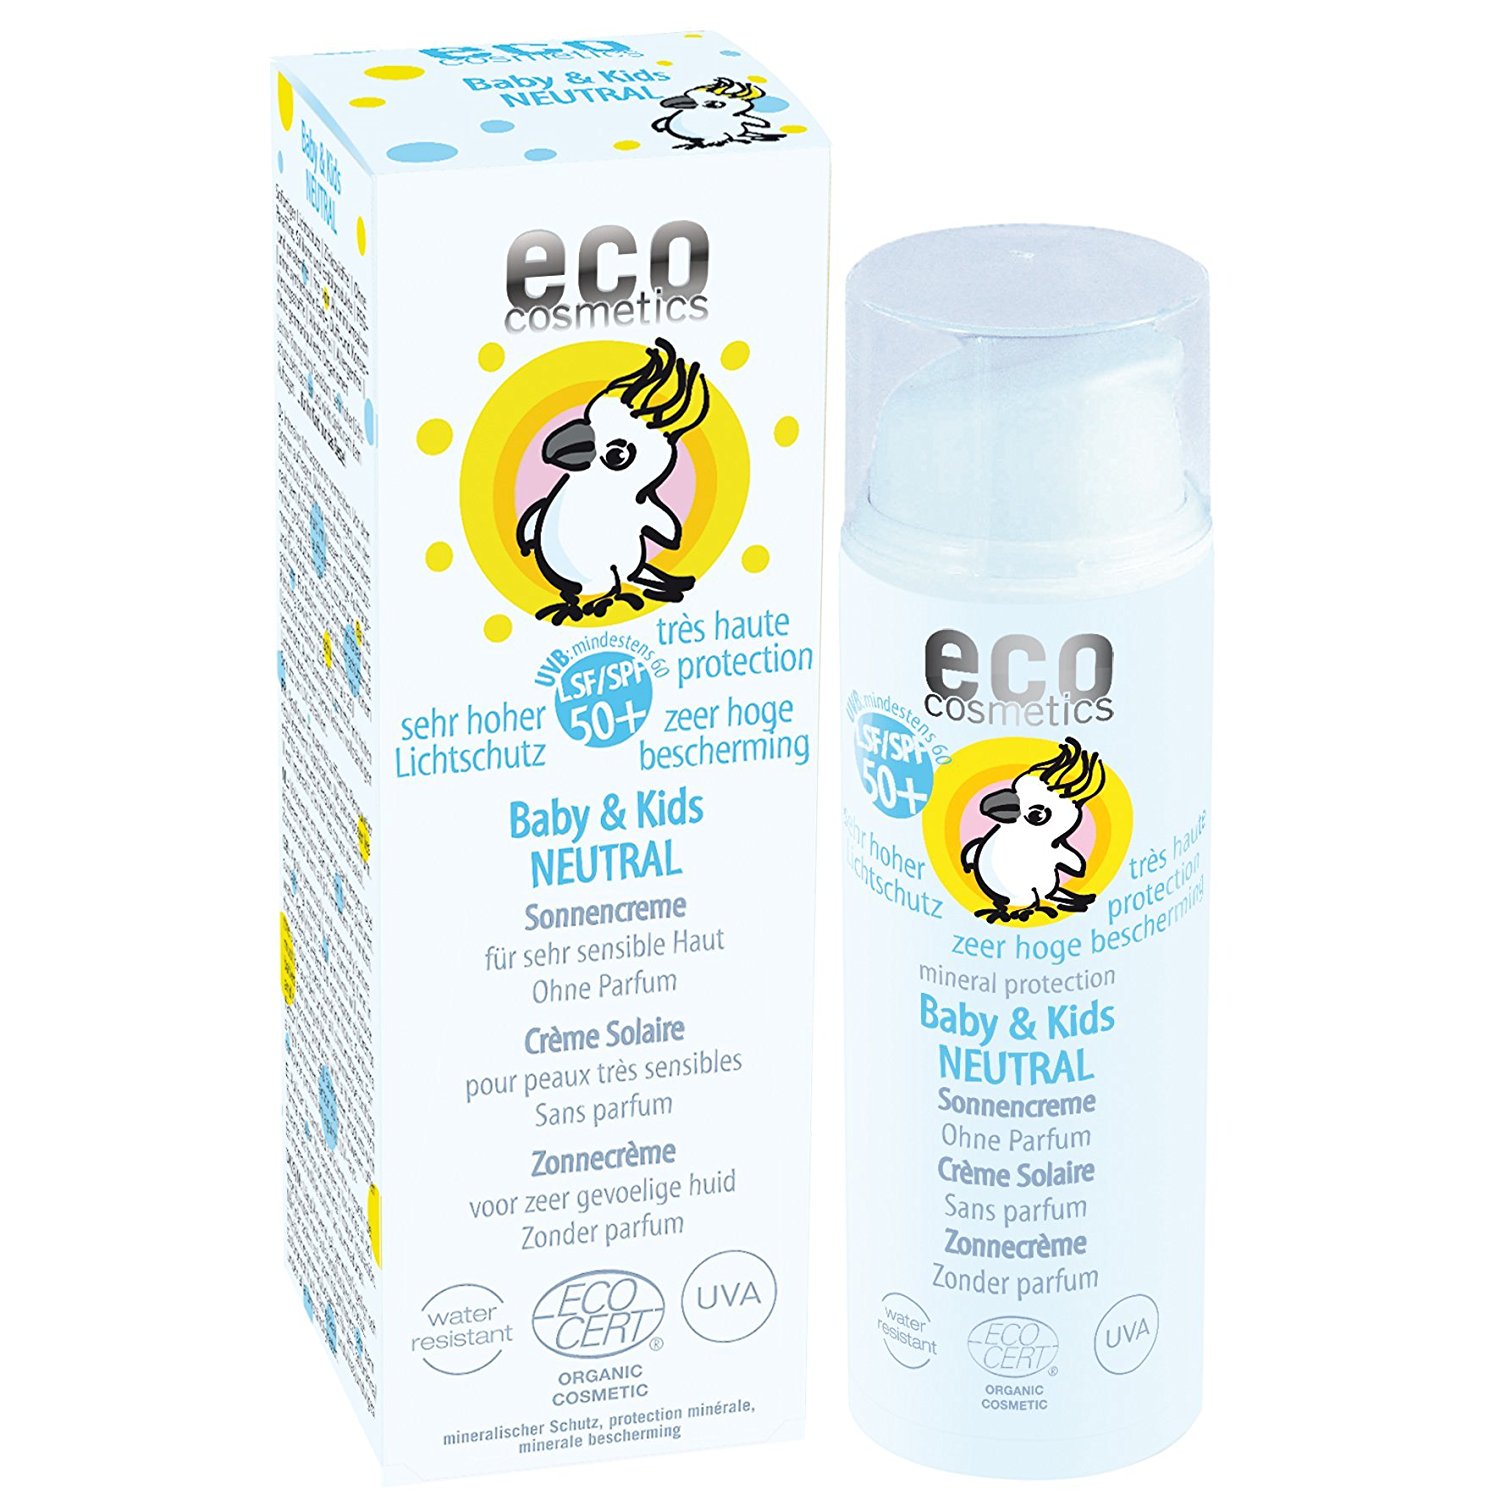 eco cosmetics Baby Sonnencreme LSF50+ neutral 50ml